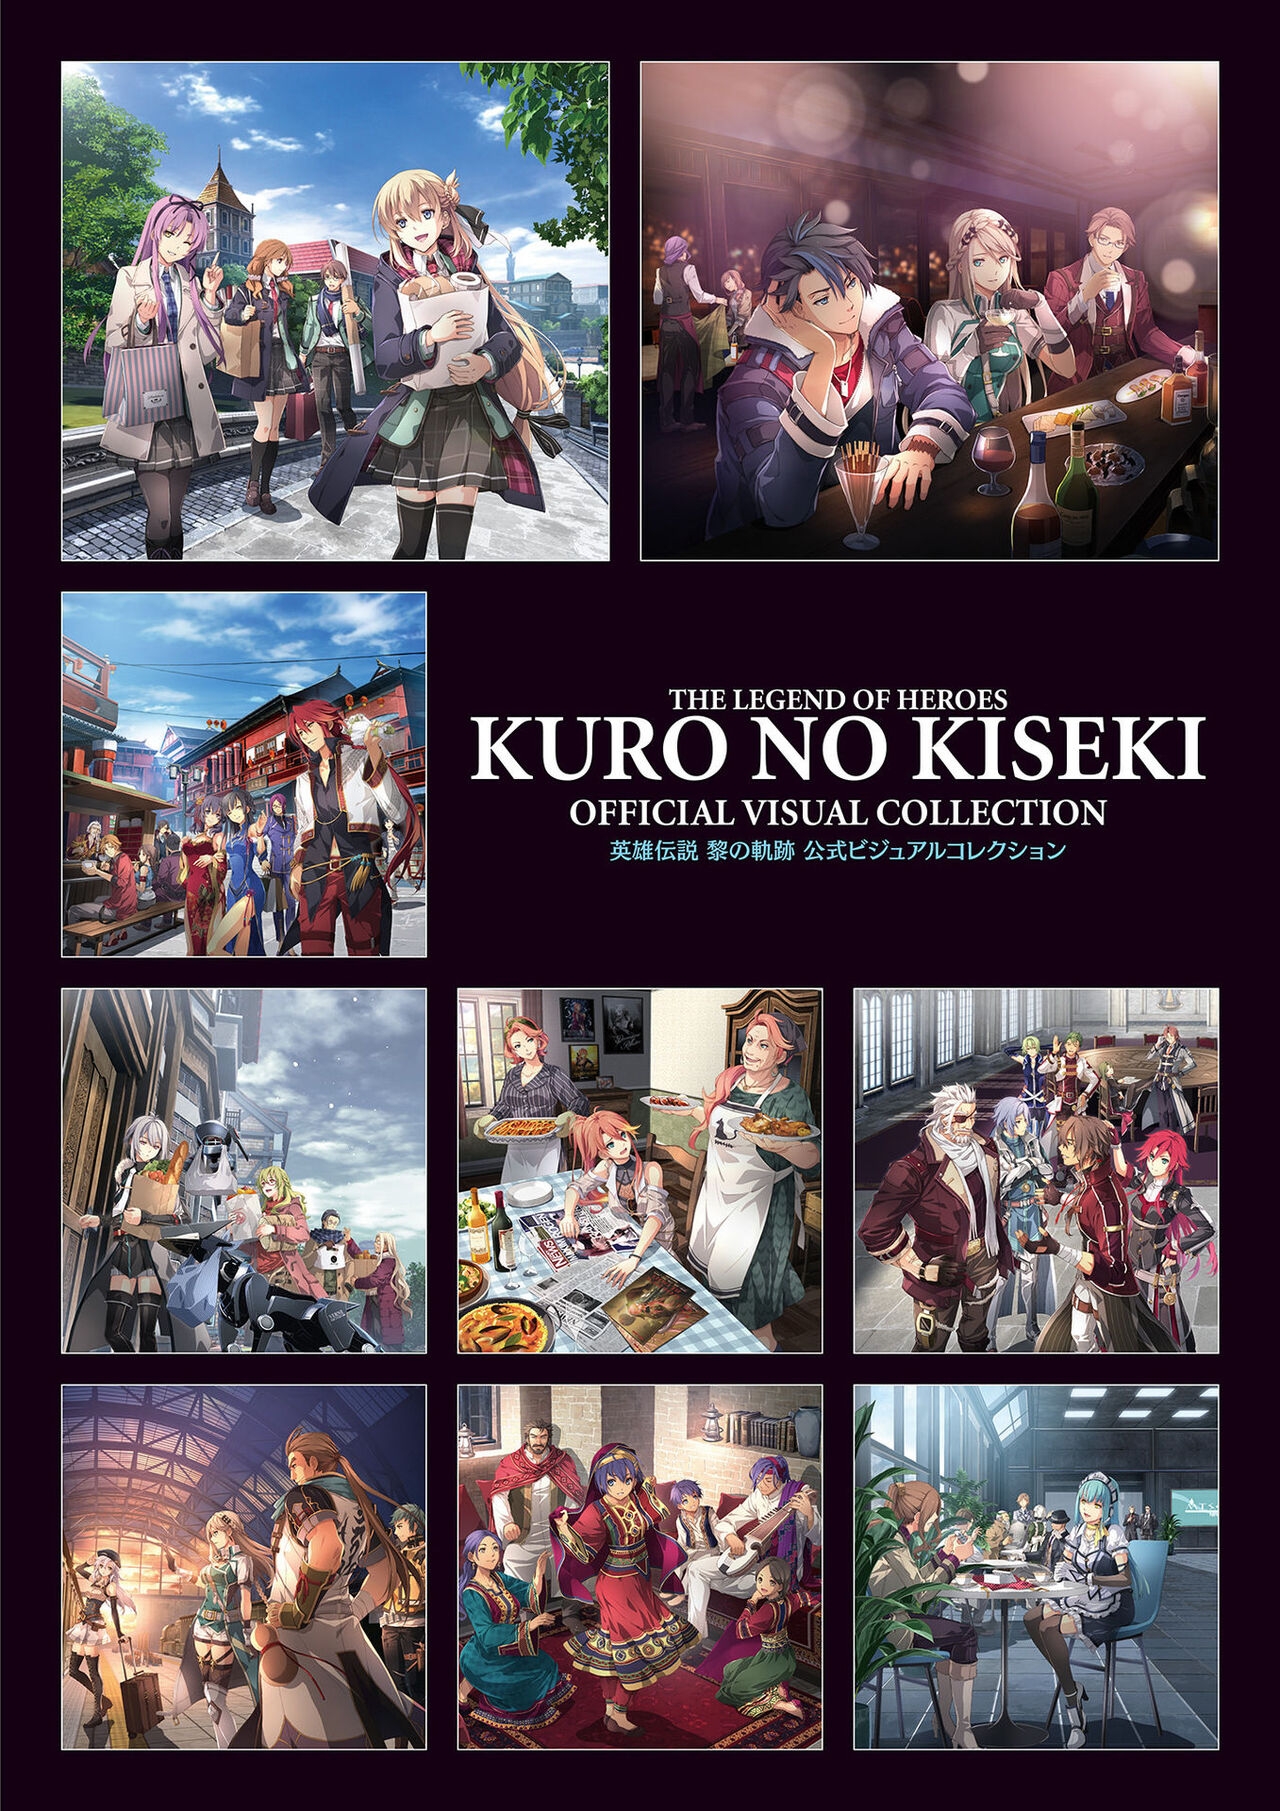 The Legend of Heroes: Kuro no Kiseki Official Visual Collection 2